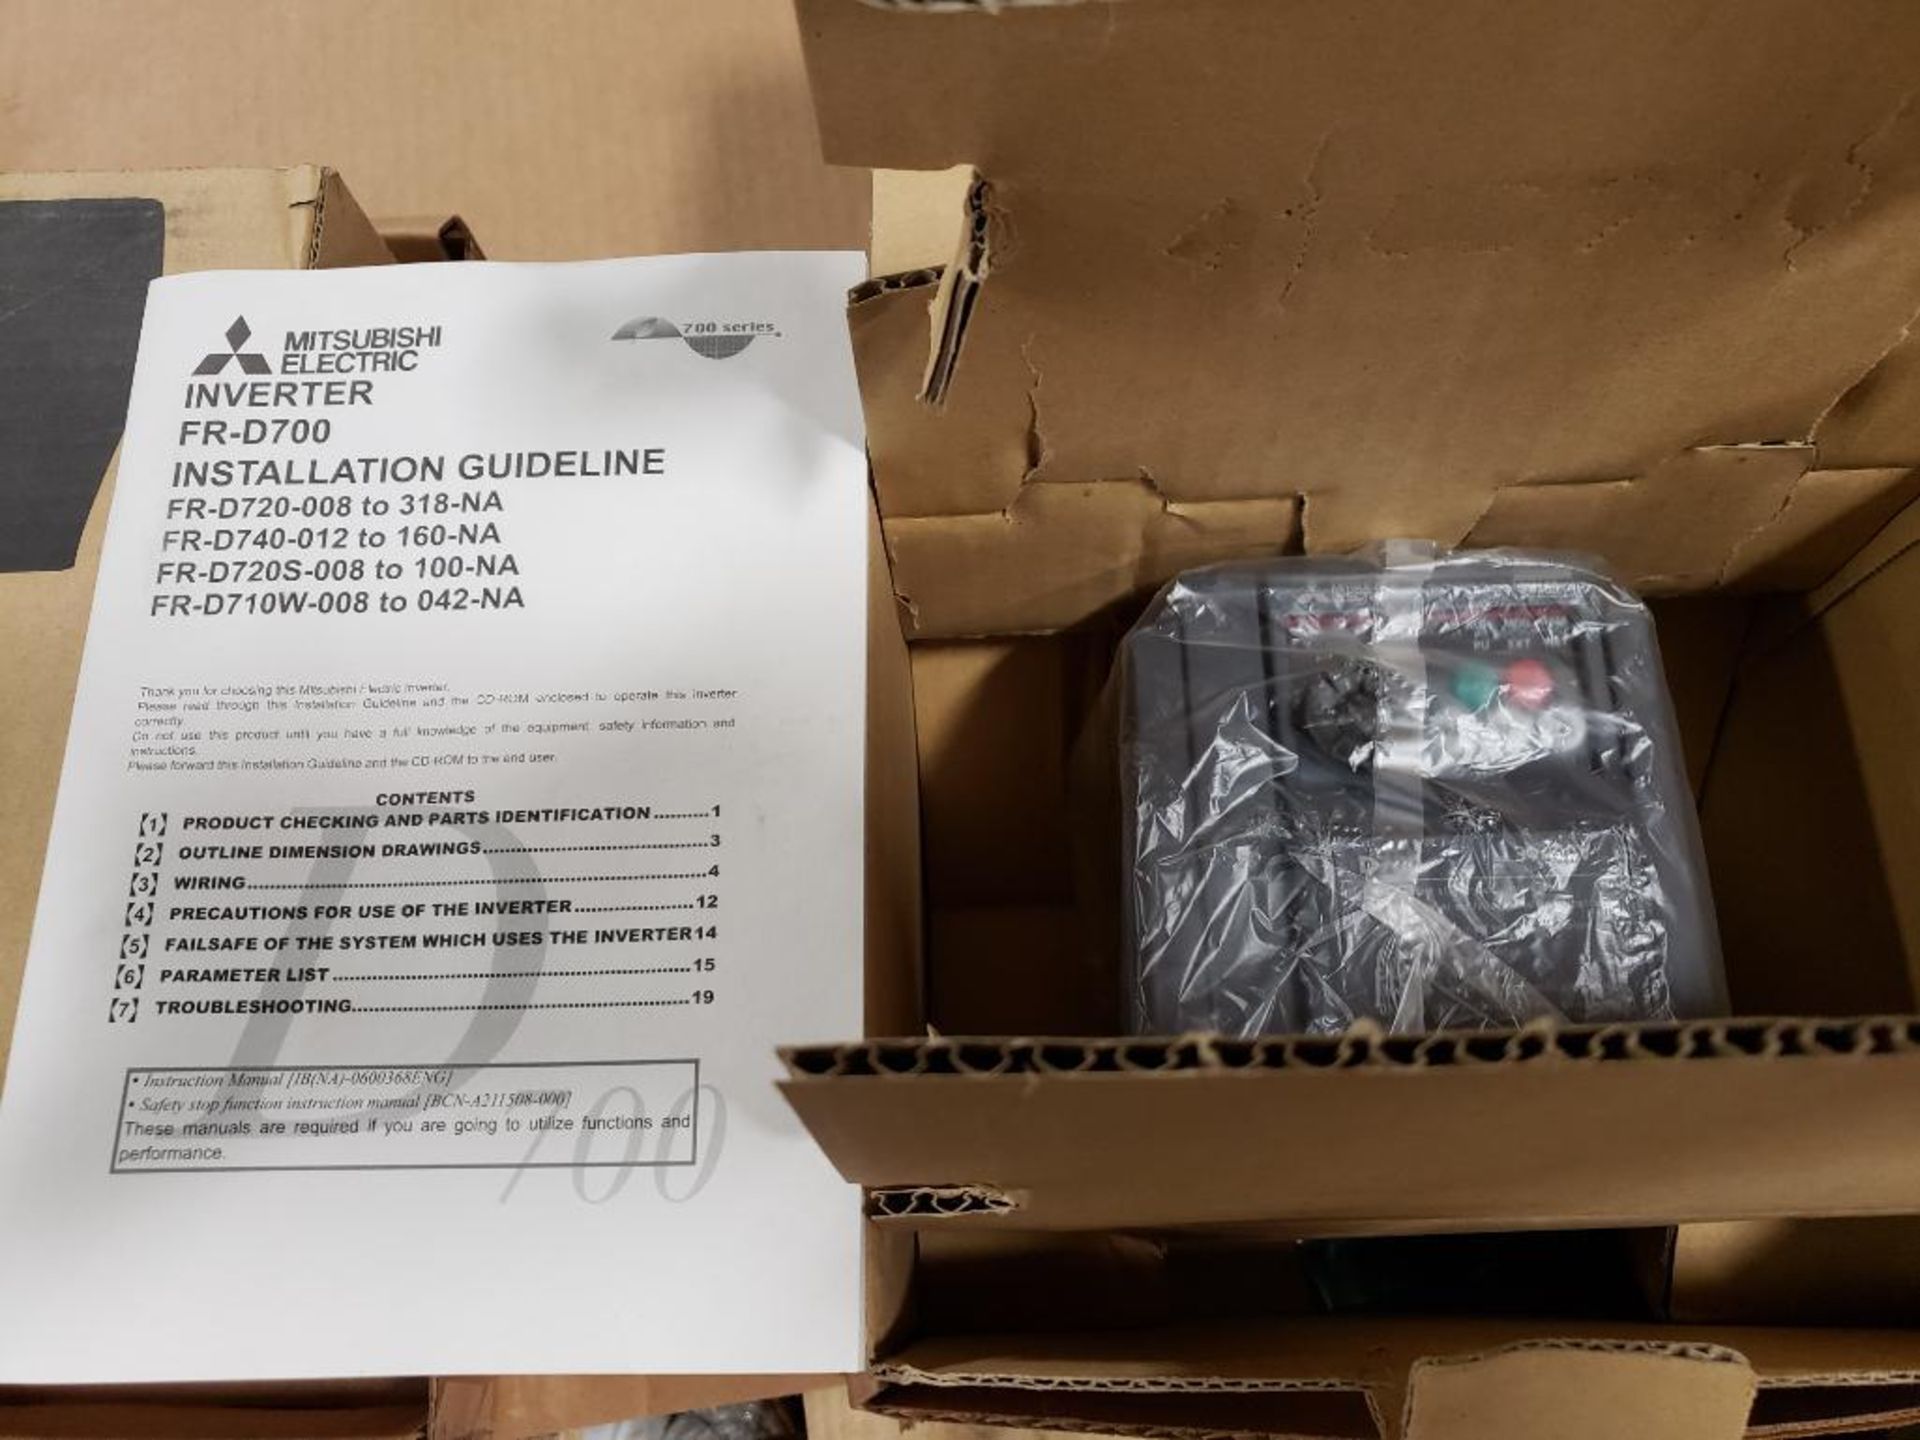 Mitsubishi Electric FR-D740-036-NA compact size inverter. New in box. - Image 4 of 4